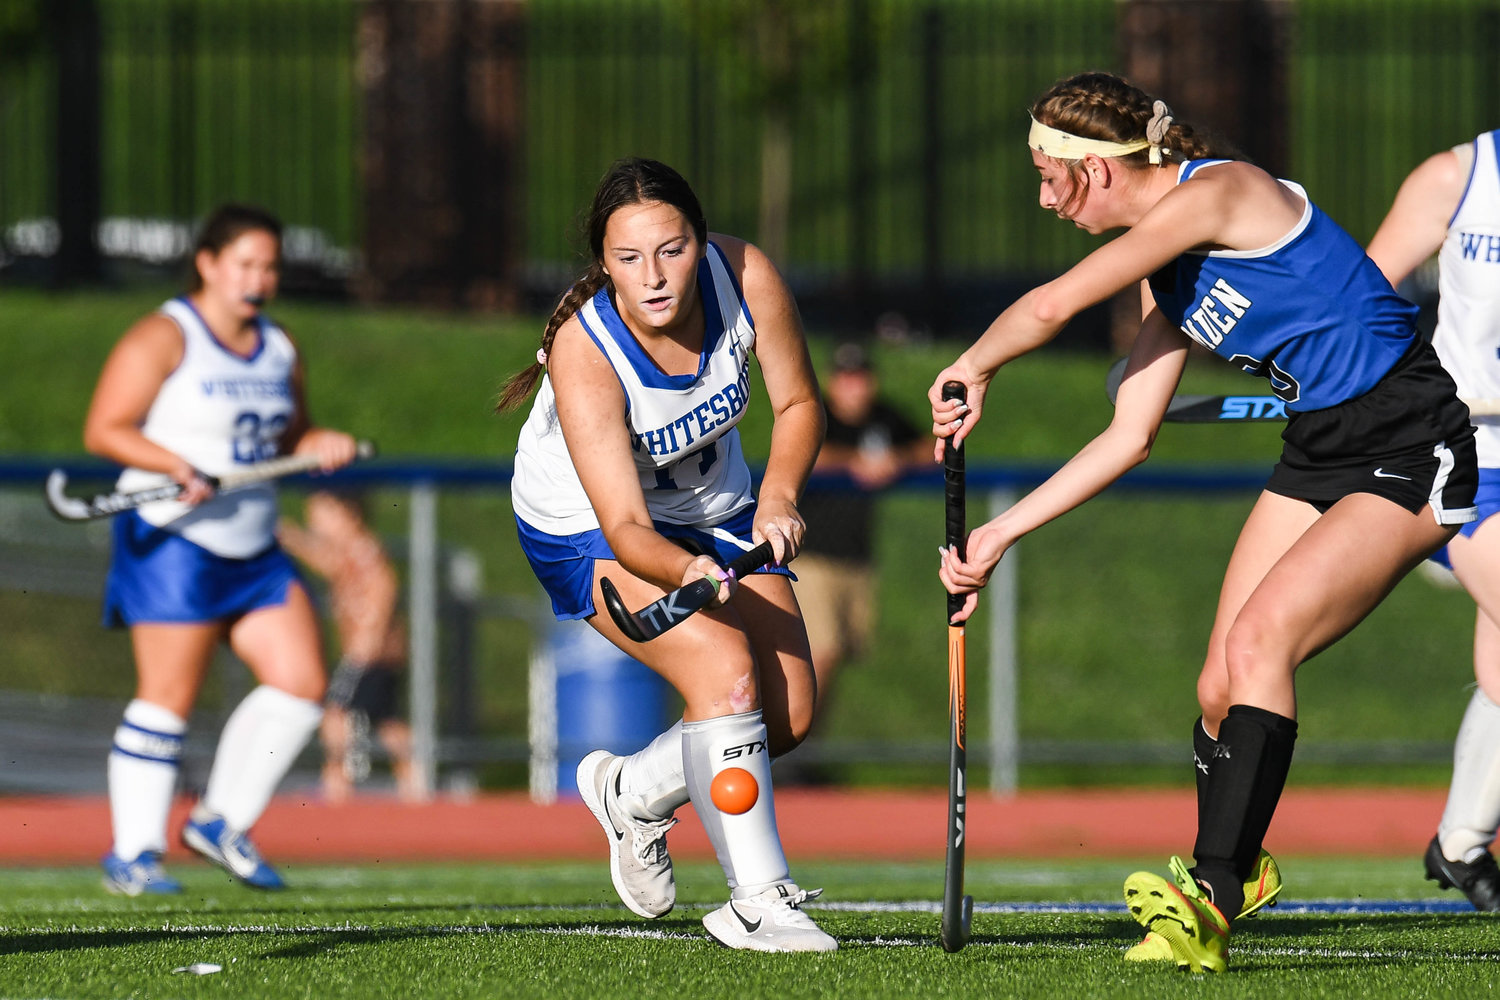 Whitesboro’s Talia Nash, center, controls the ball against Camden’s Gabby Croniser, right, during the field hockey game on Wednesday. Croniser scored both goals for the Blue Devils in the team’s 2-1 win.